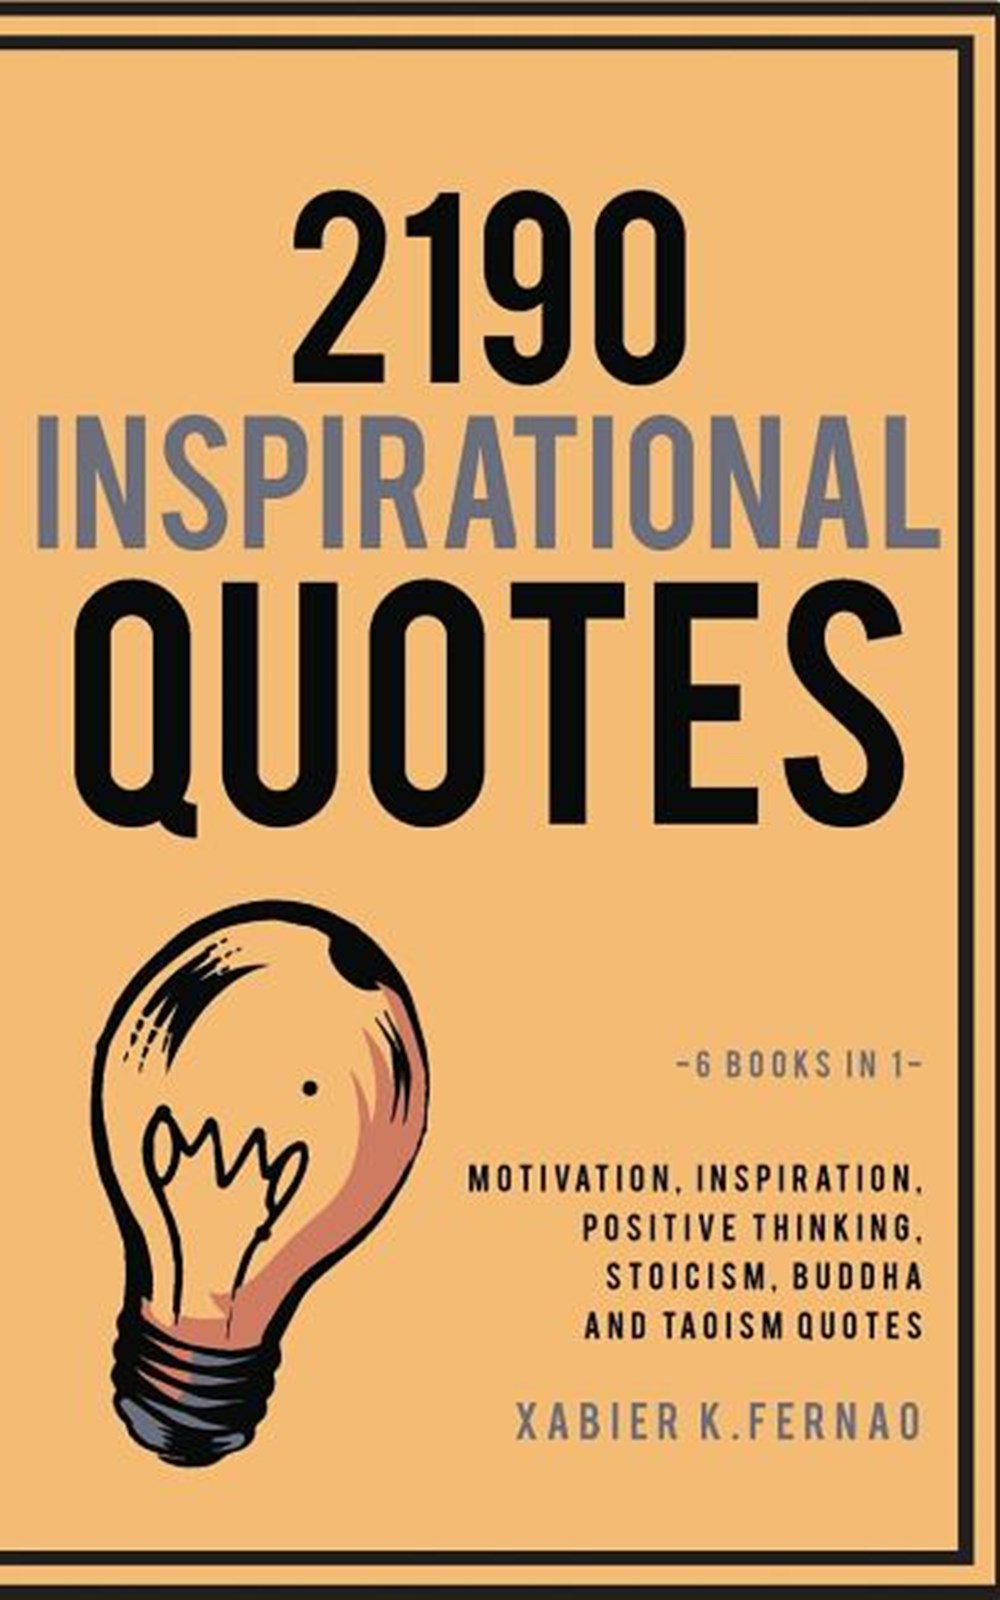 2190 Inspirational Quotes: Motivation, Inspiration, Positive Thinking, Stoicism, Buddha and Taoism Q